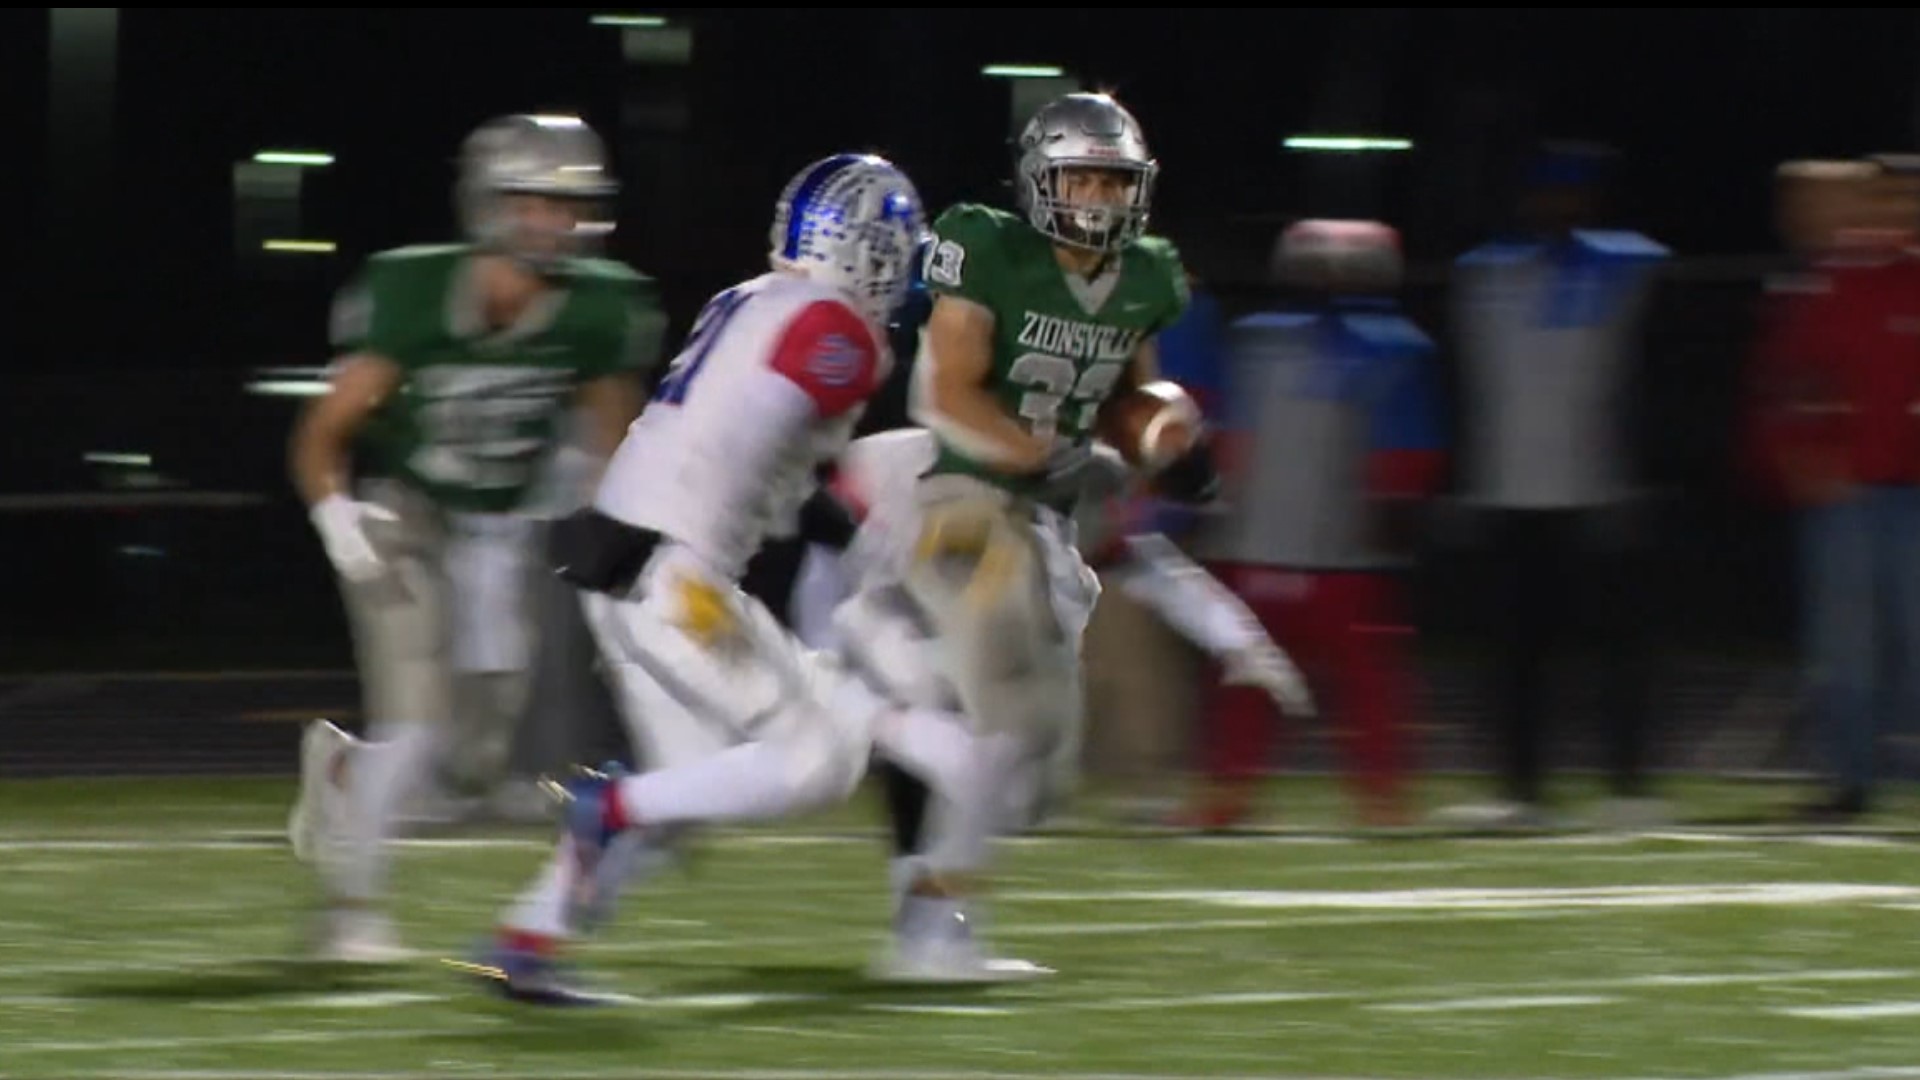 Zionsville wins the sectional final Friday night on Operation Football.